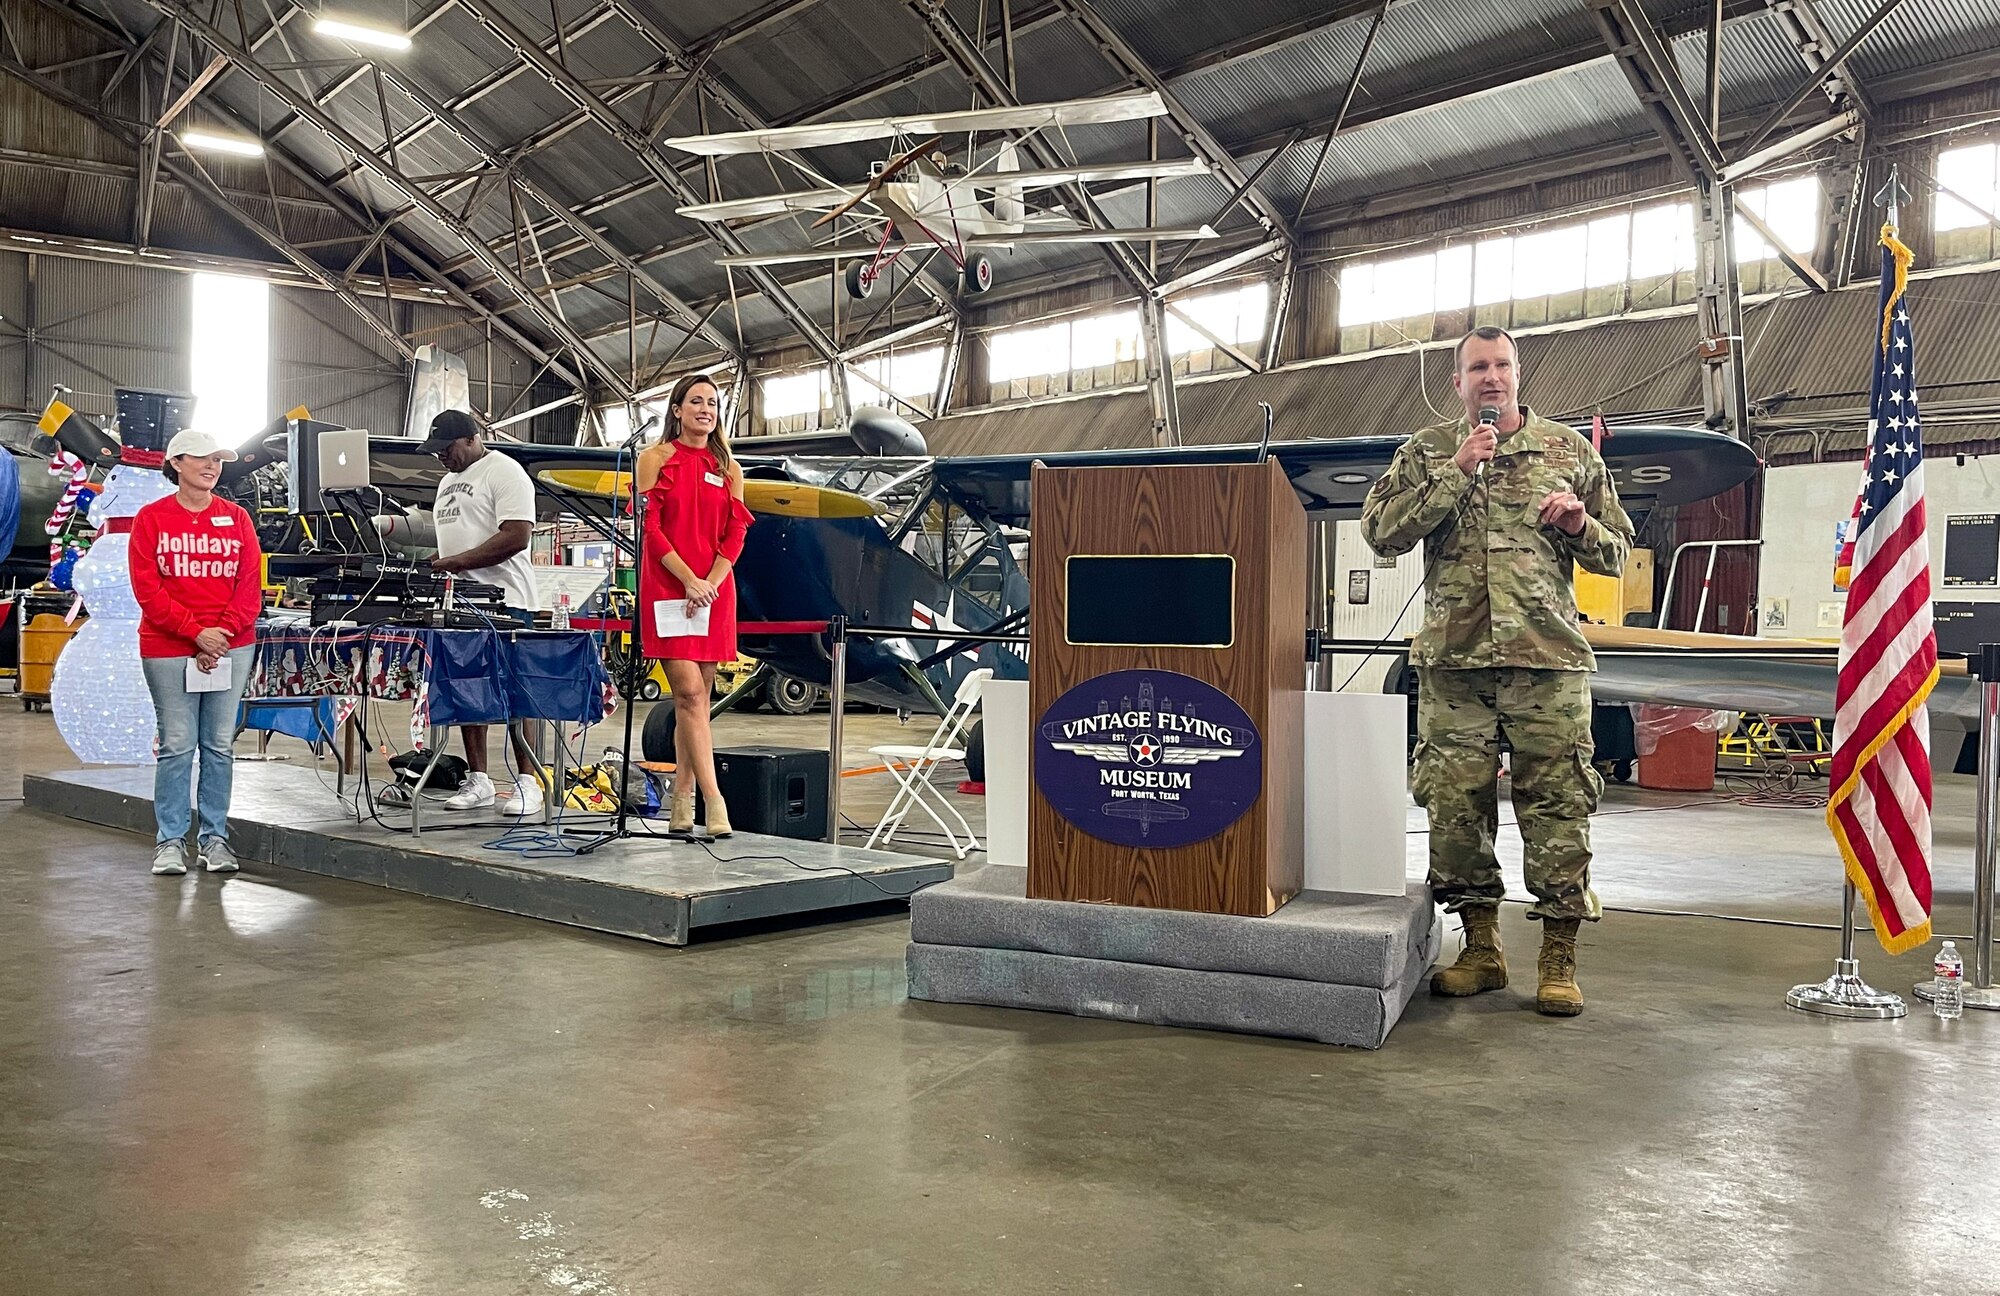 Members of the 301st Fighter Wing, along with wing senior leadership, participated in the sixth annual Holidays & Heroes community event at the Vintage Flying Museum in Fort Worth, Texas on Dec. 5, 2021.